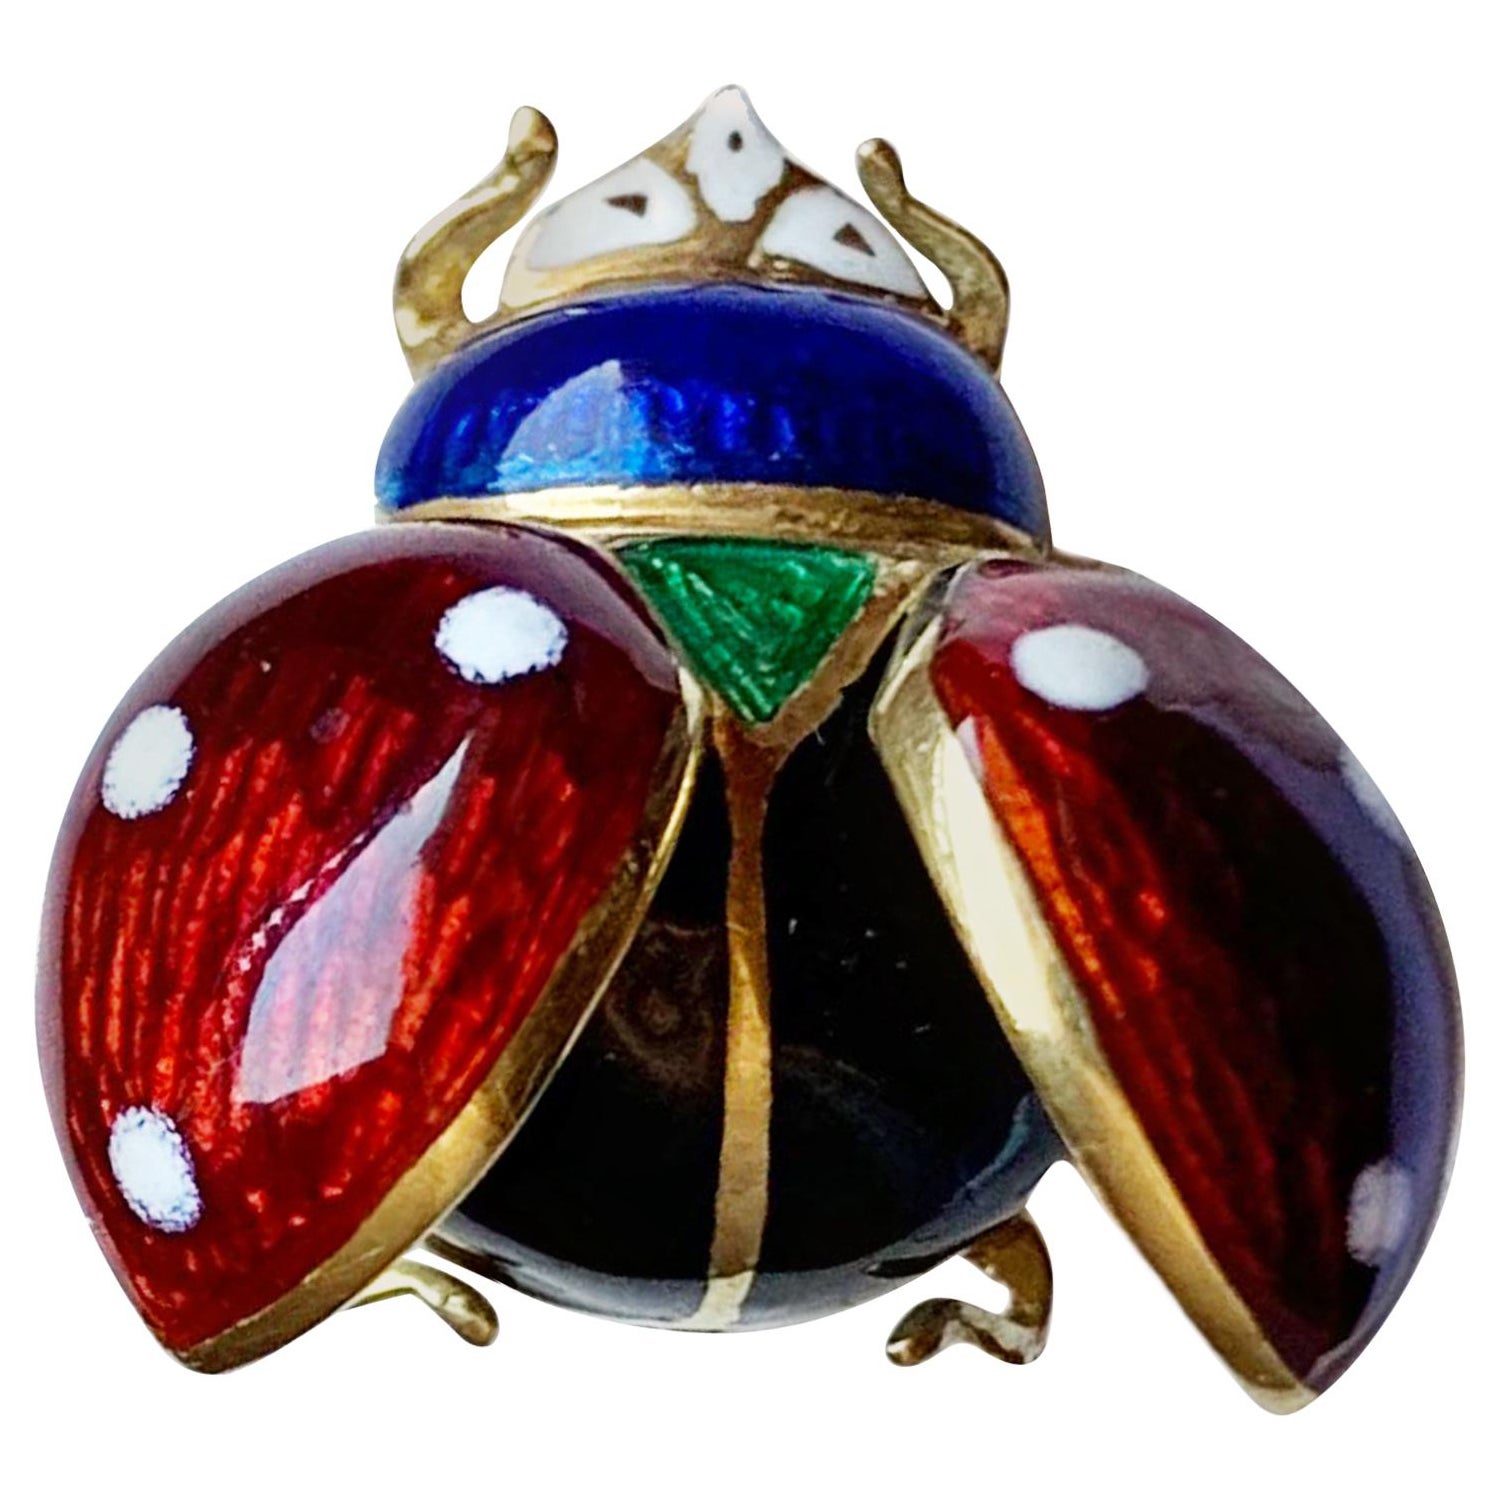 Vintage 18 Karat Gold and Enamel Brooch Depicting a Ladybug with Open Wings